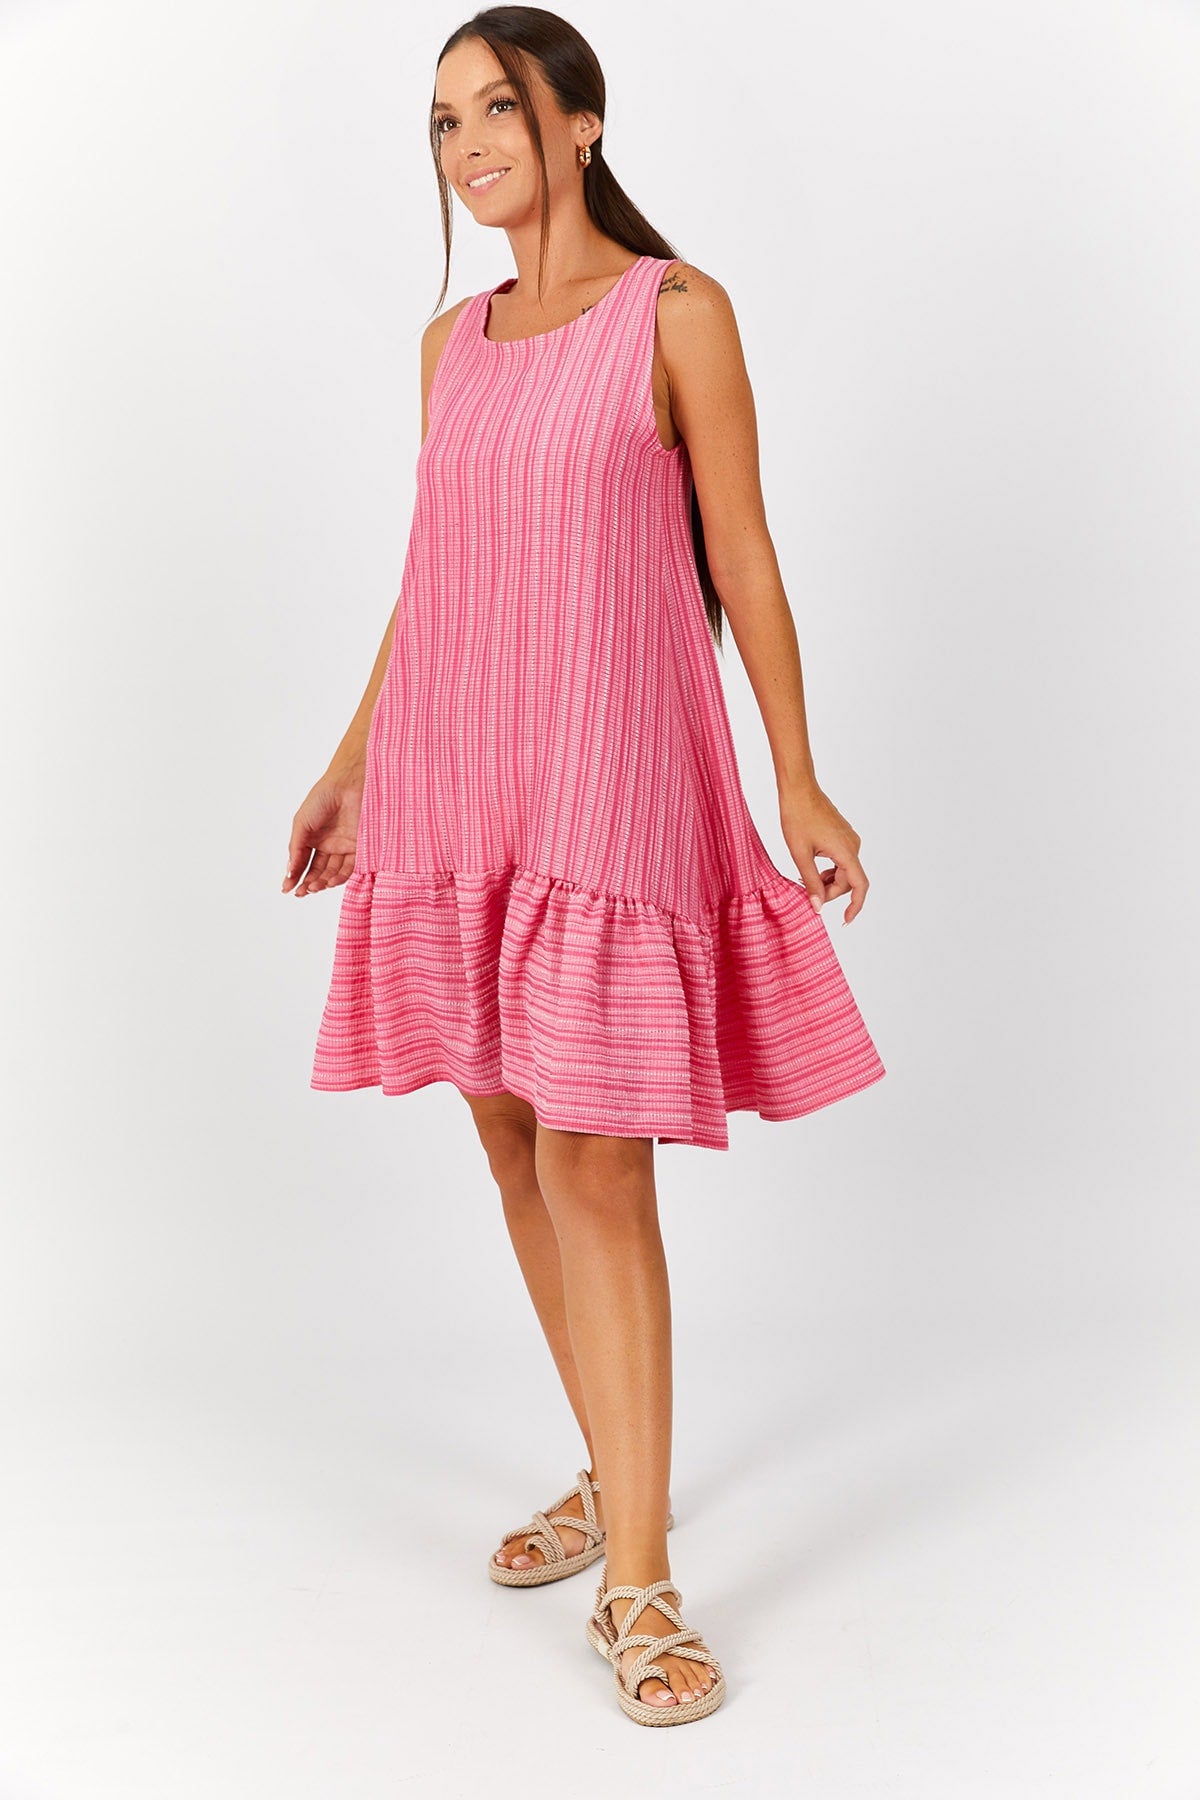 Fuchsia sleeveless skirt with frilly patterned dress Arm-221131